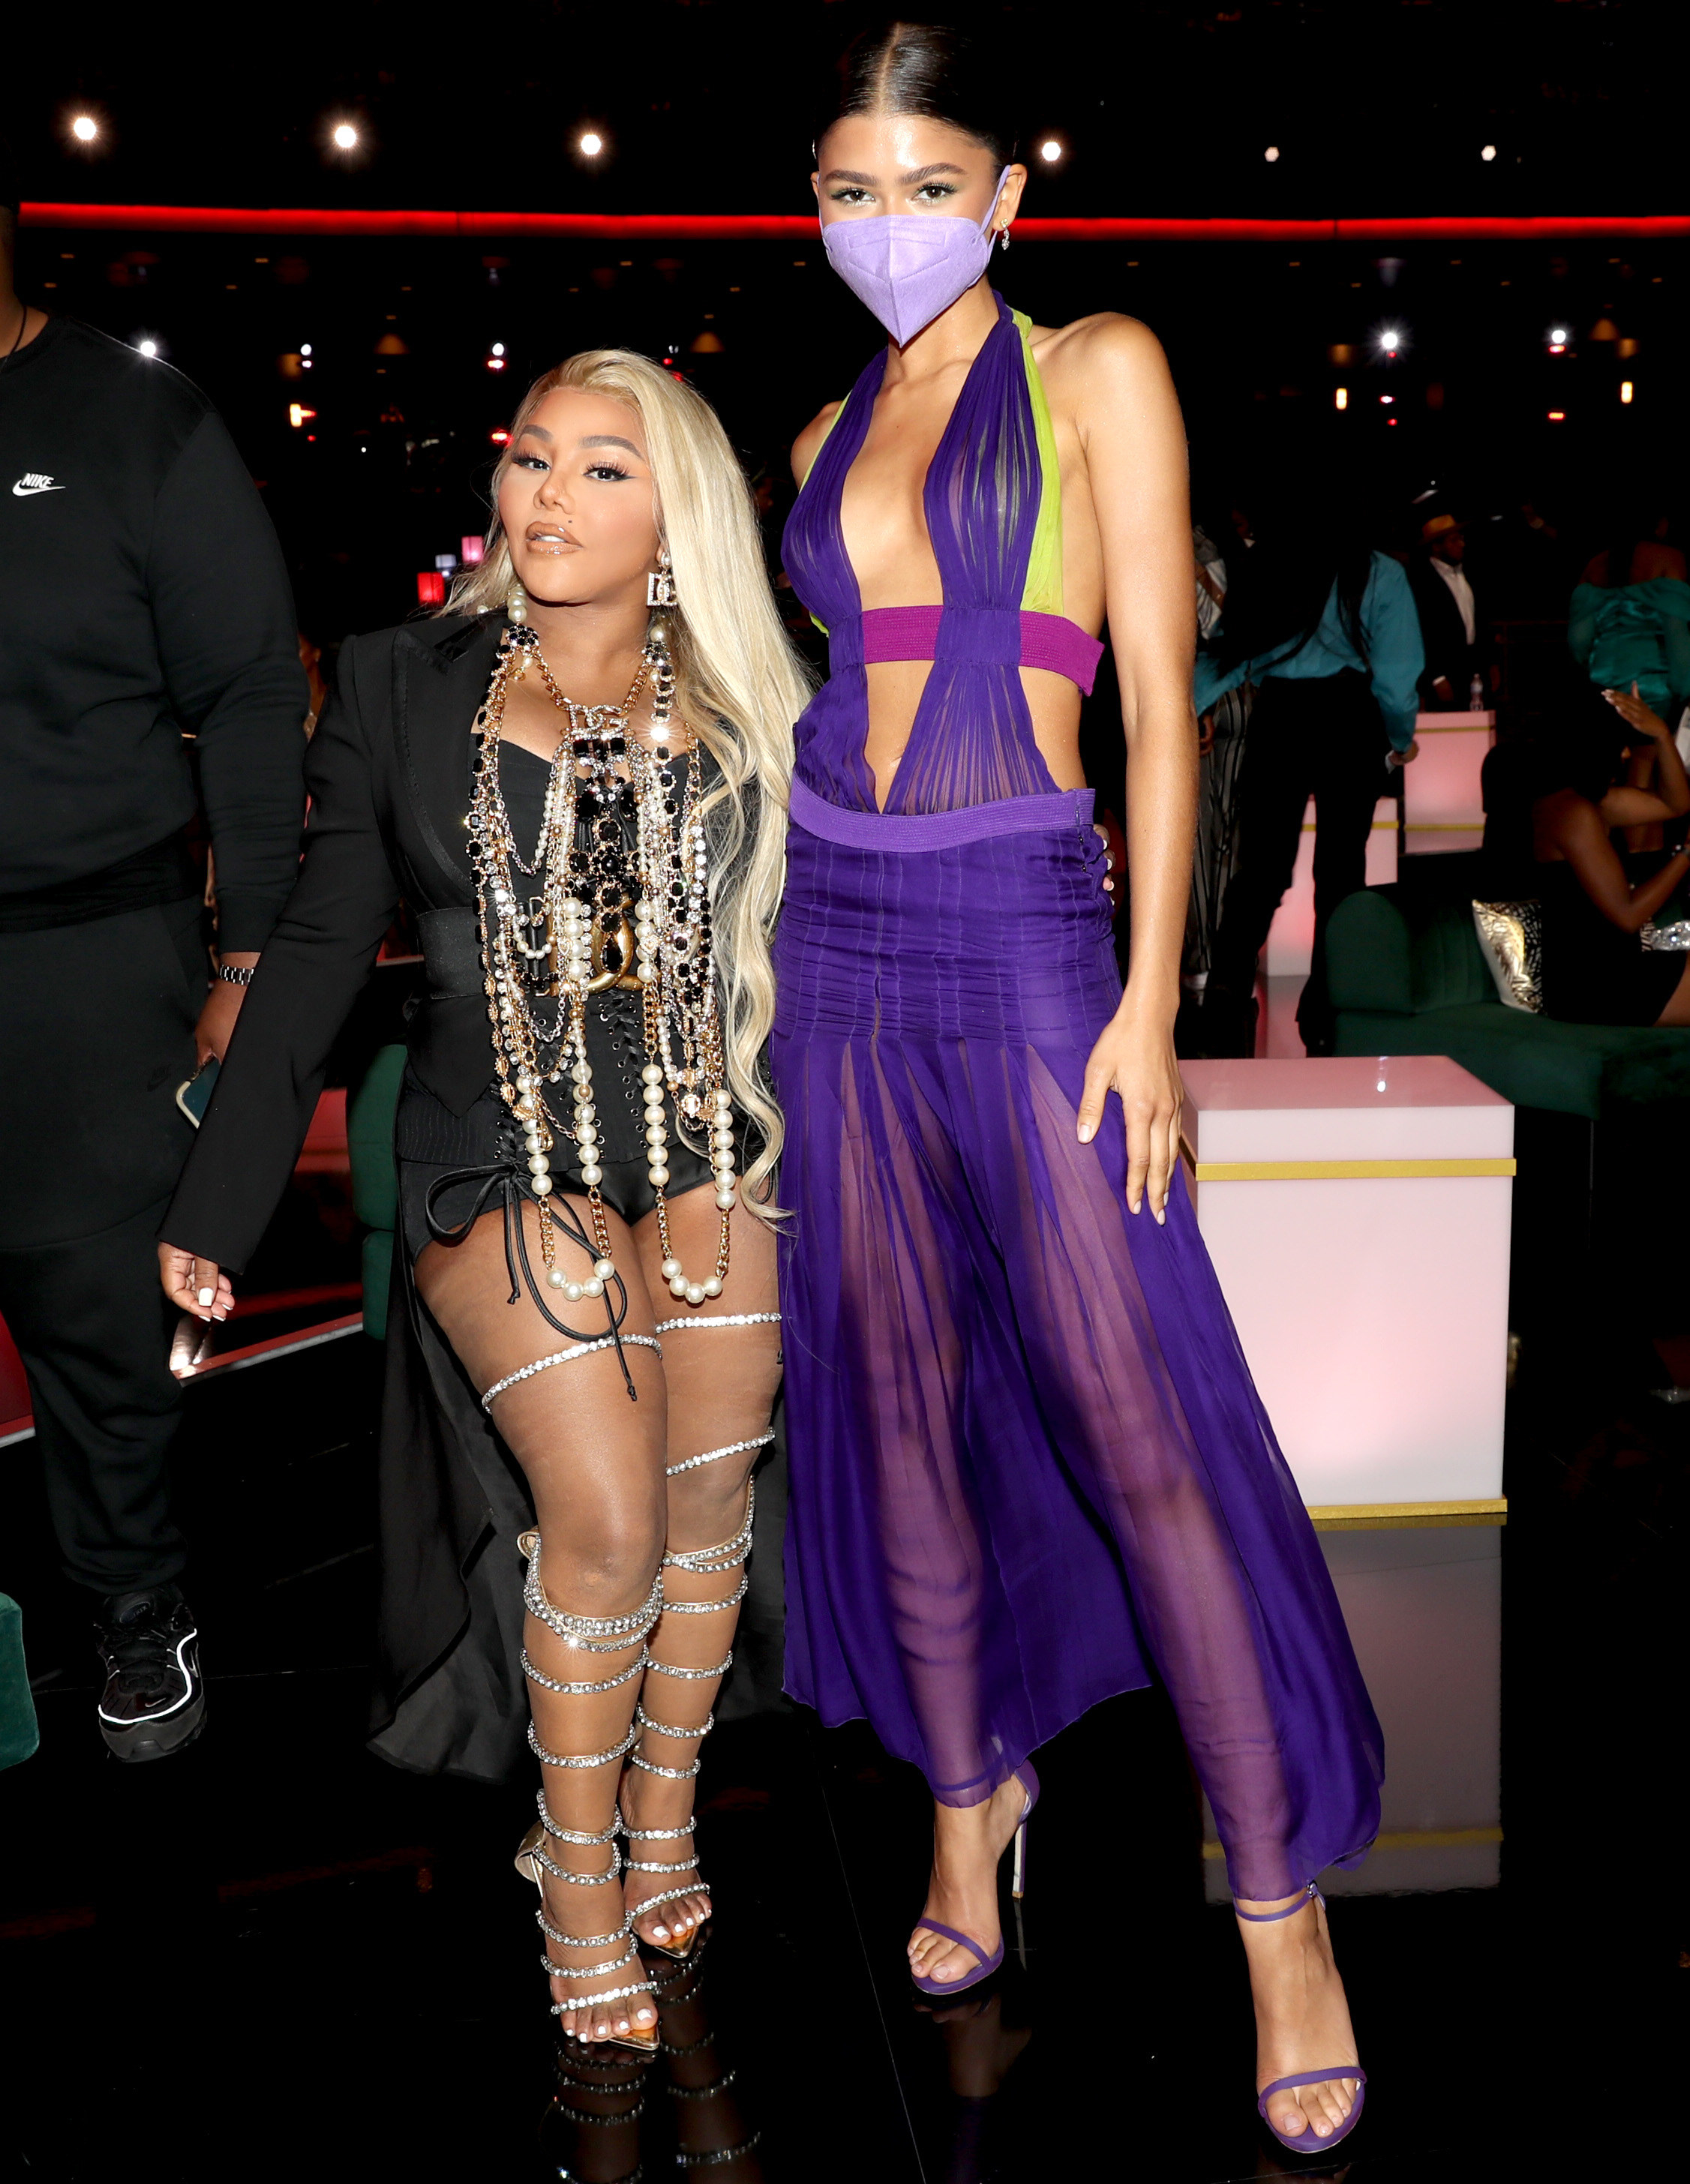 Lil&#x27; Kim and Zendaya (wearing the dress) attend the BET Awards 2021 at Microsoft Theater on June 27, 2021 in Los Angeles, California